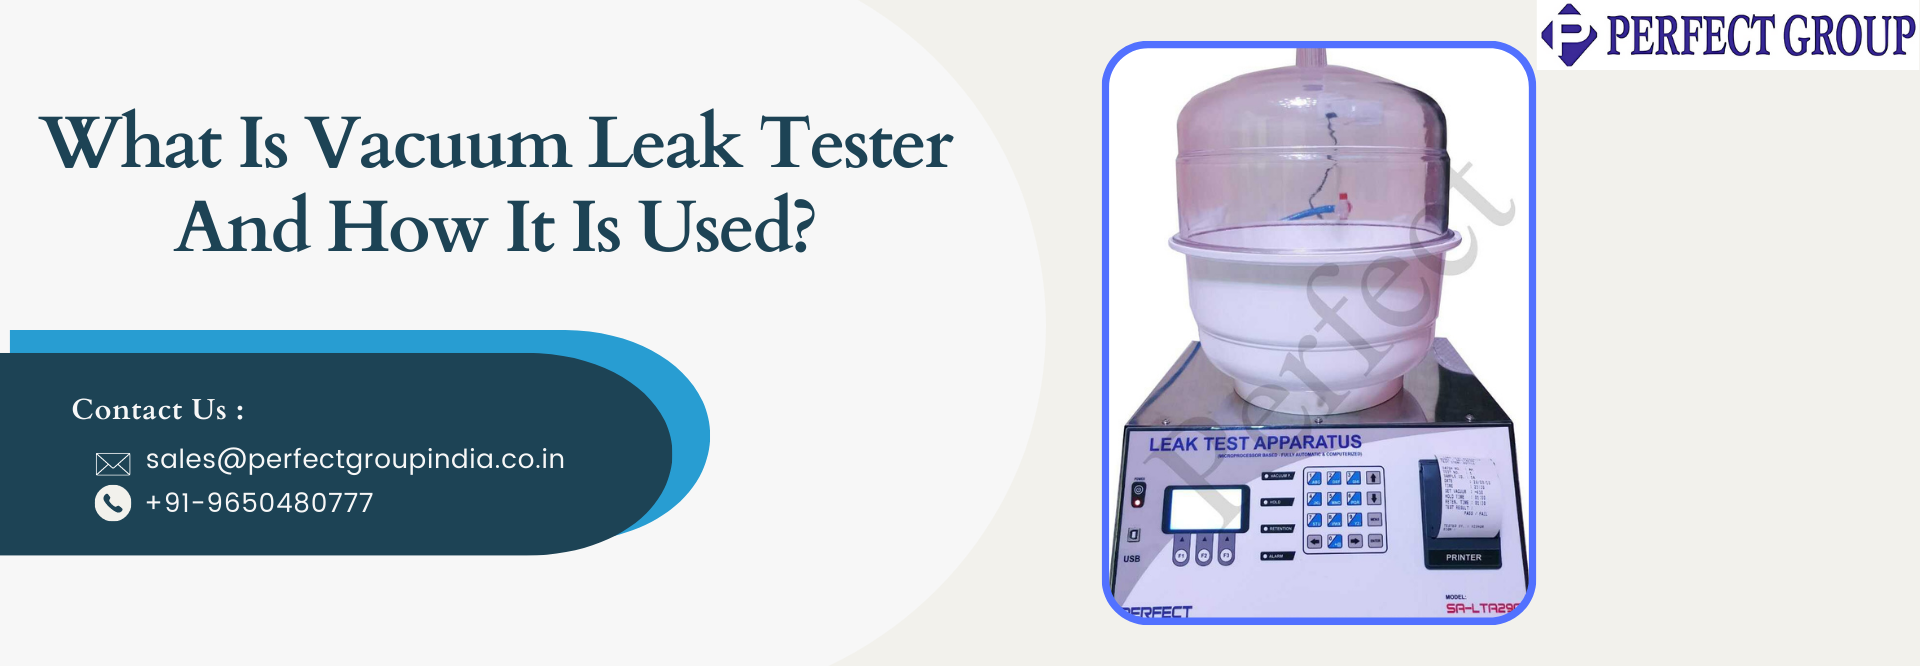 What Is Vacuum Leak Tester And How It Is Used?